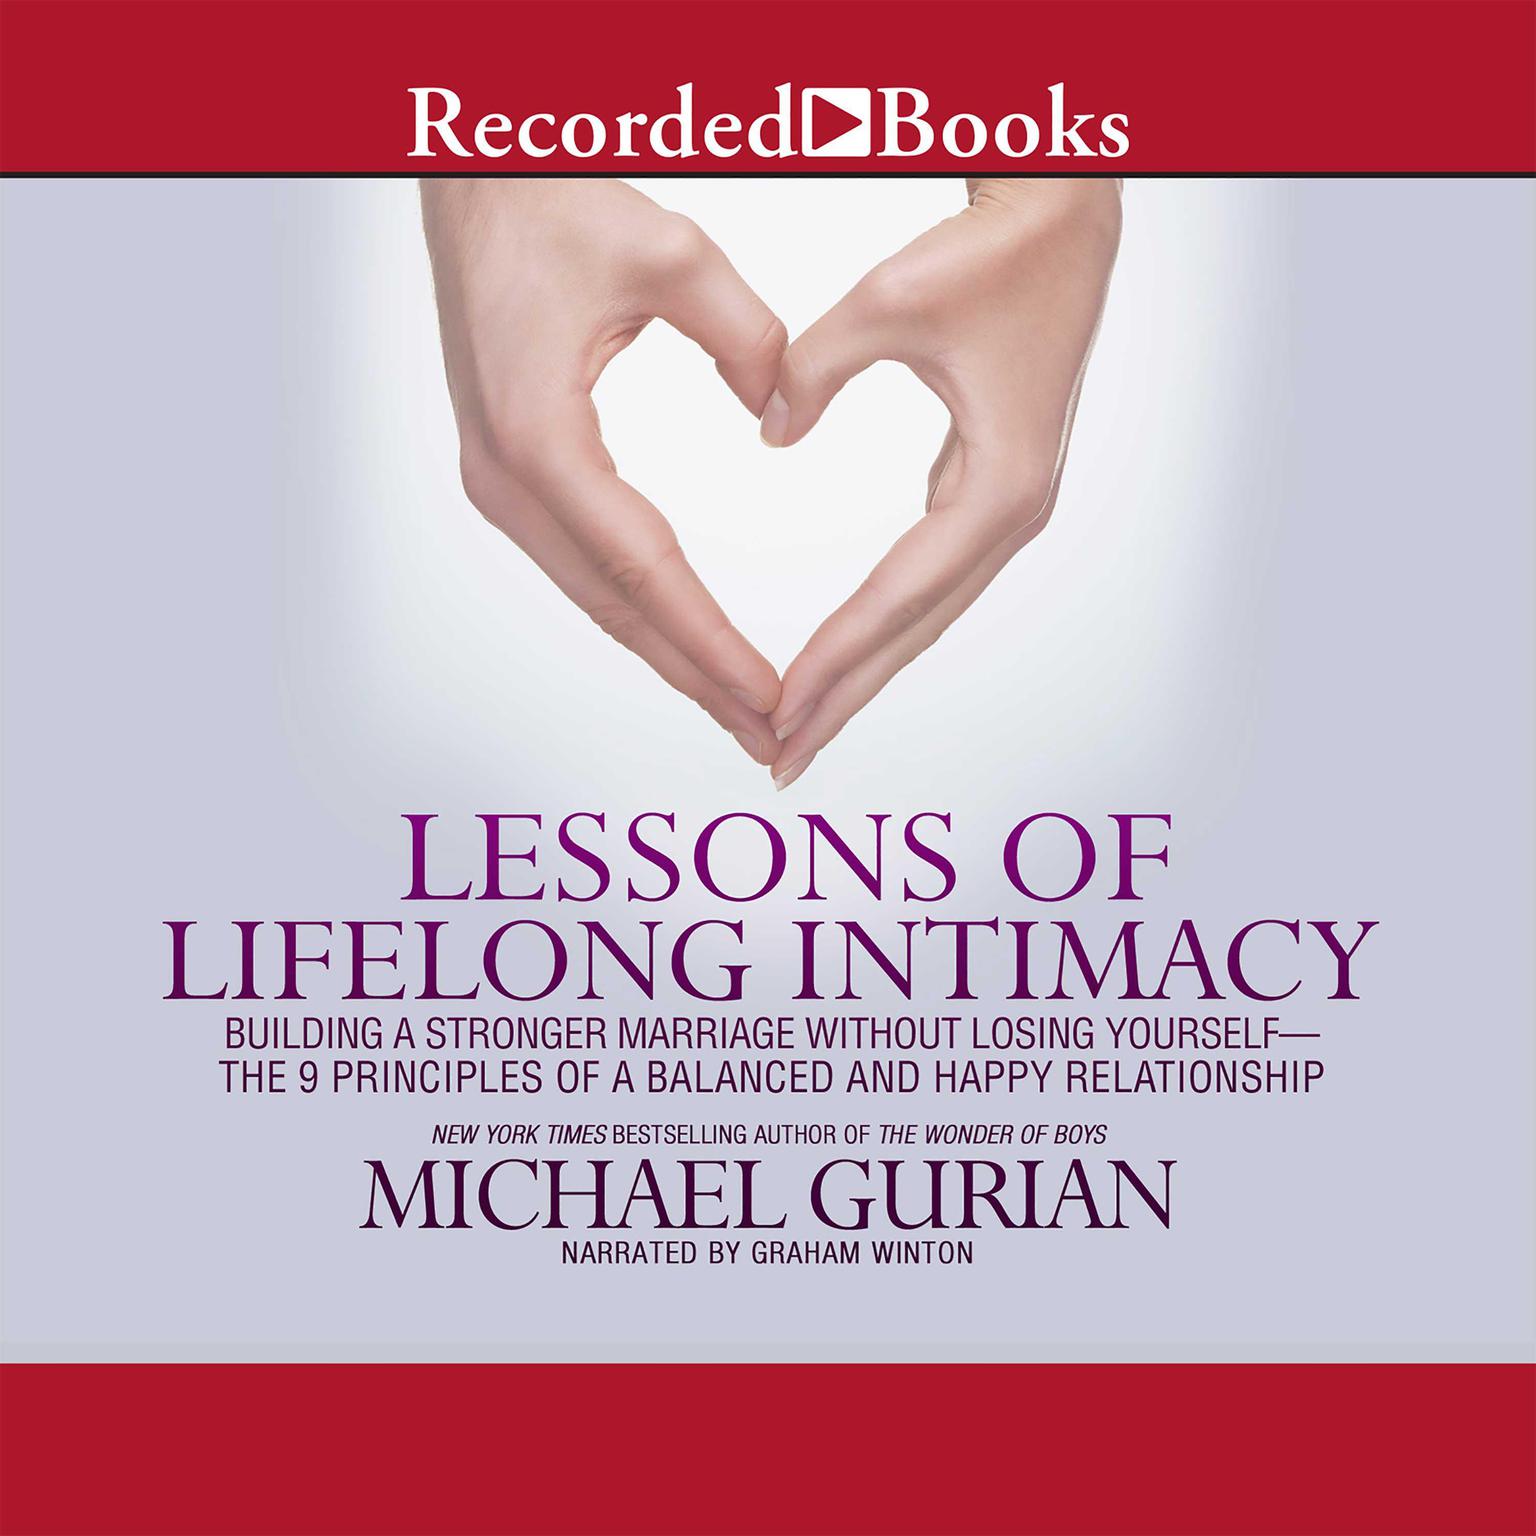 Lessons of Lifelong Intimacy: Building a Stronger Marriage Without Losing YourselfThe 9 Principles of a Balanced and Happy Relationship Audiobook, by Michael Gurian